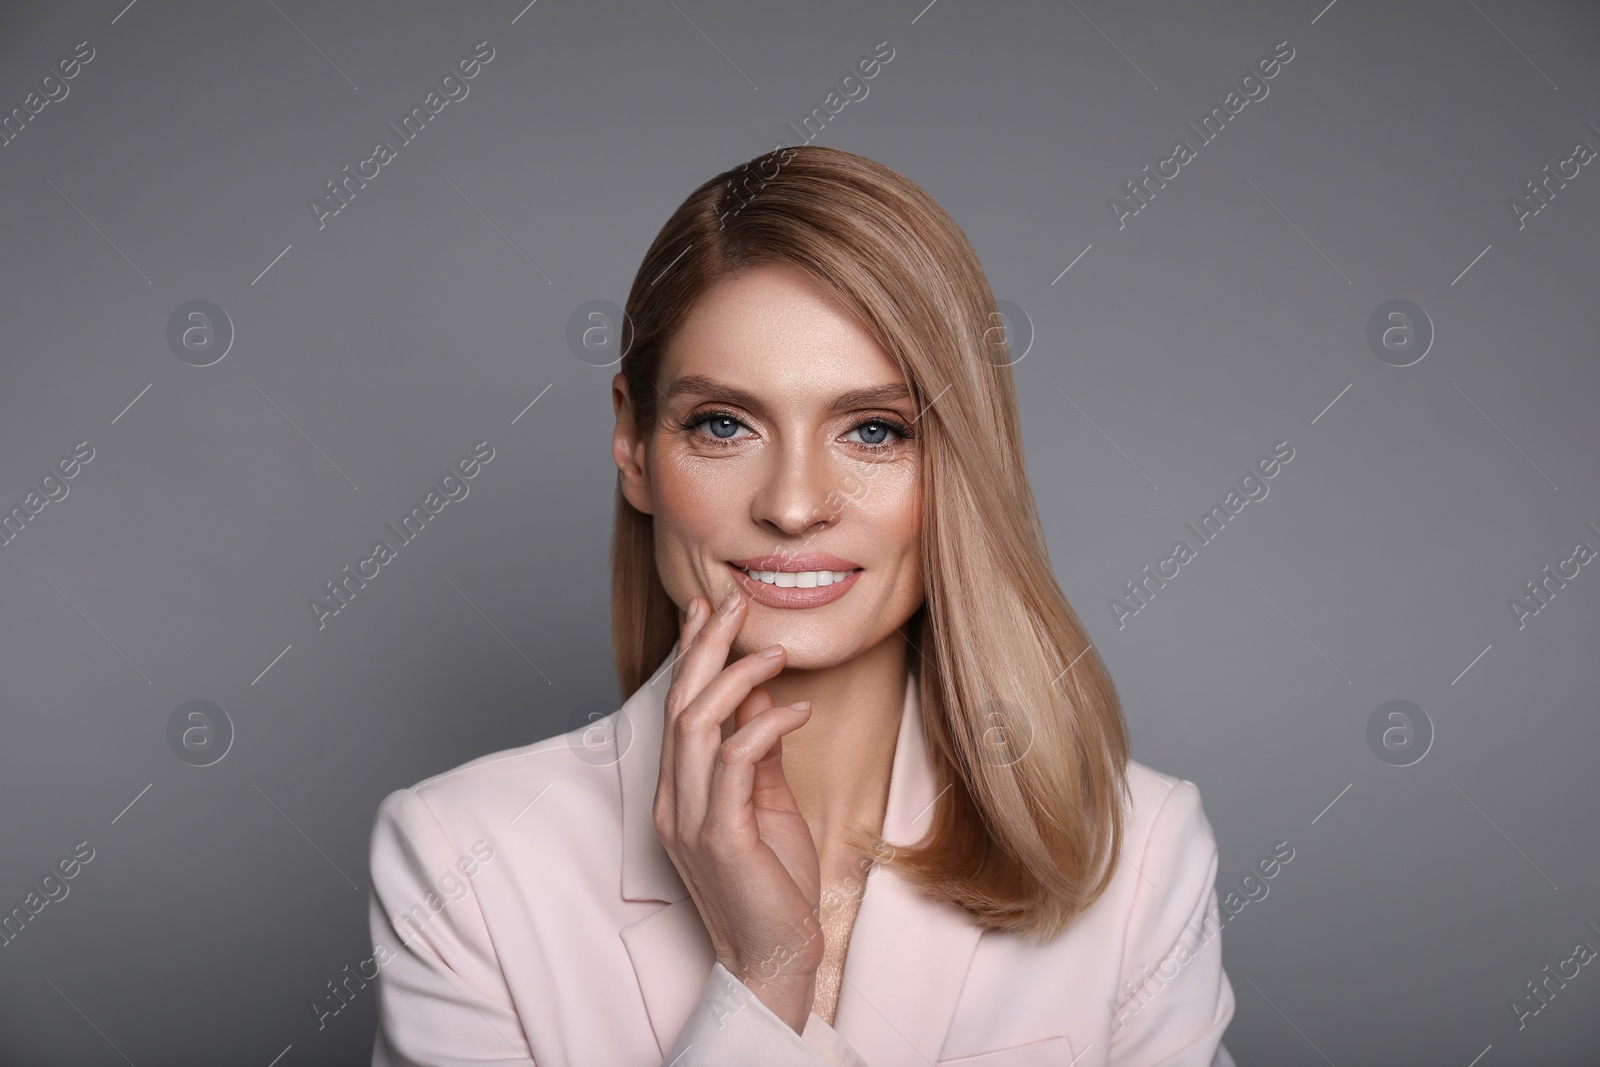 Image of Portrait of stylish attractive woman with blonde hair on grey background